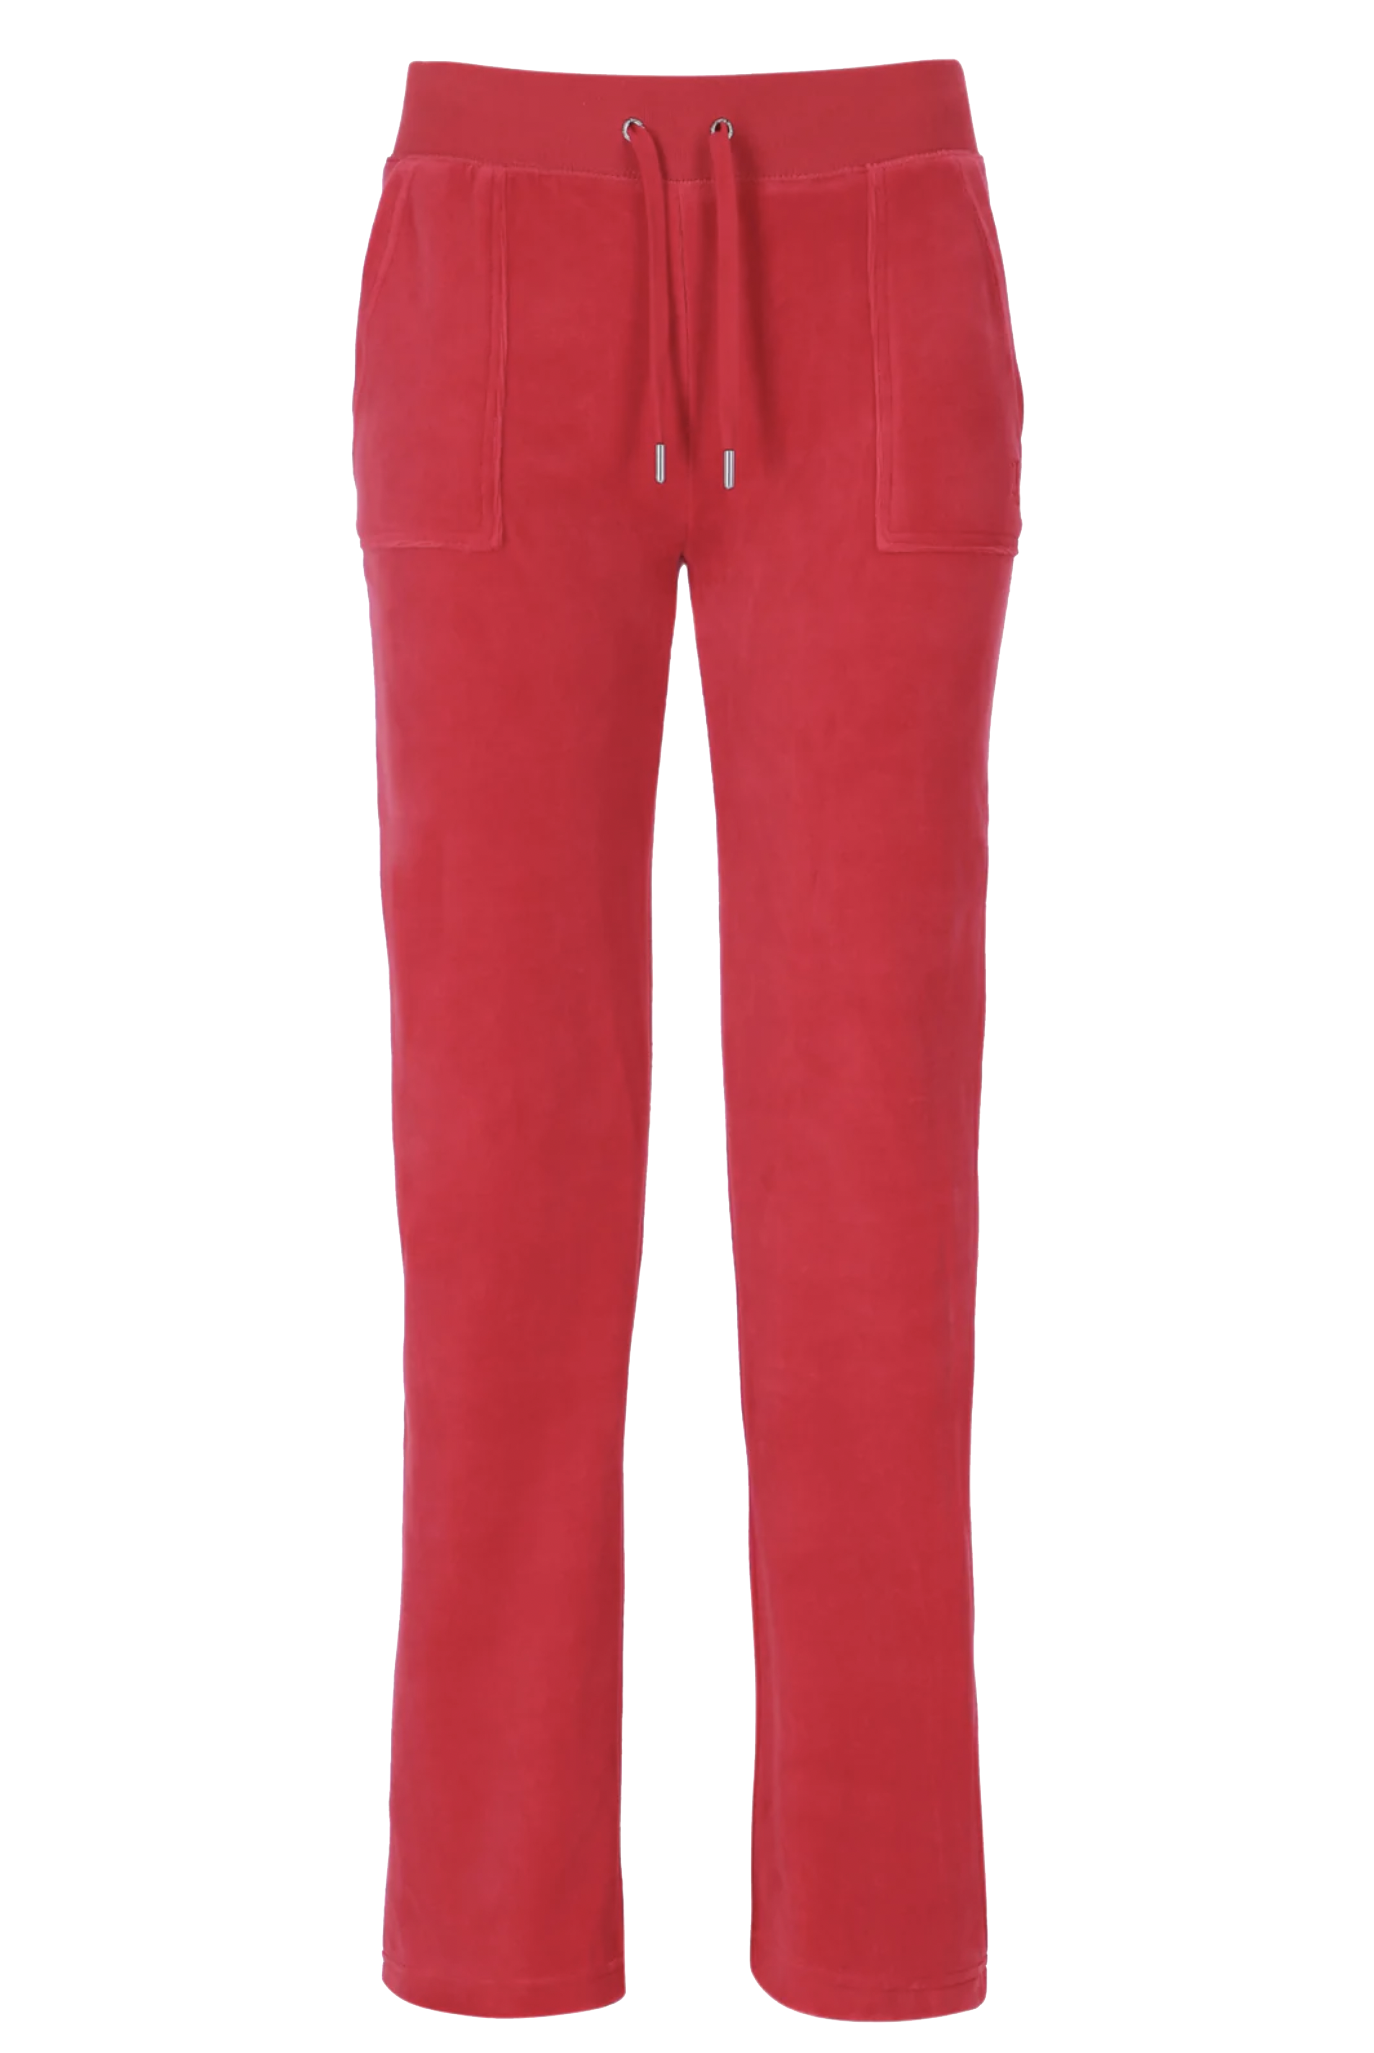 Juicy Couture Del Ray Classic Velour Pocketed Bottoms - Astor Red